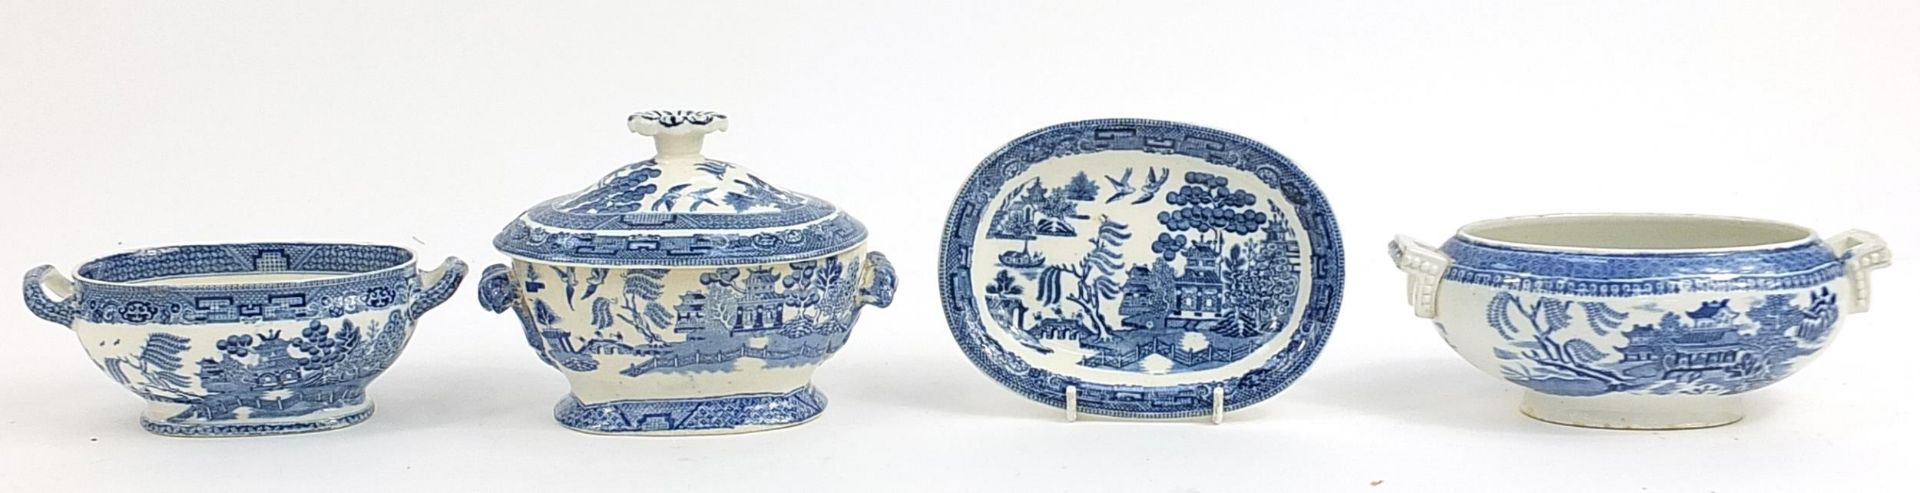 Old blue and white Willow pattern tureens, covers and stands, the largest 20cm wide